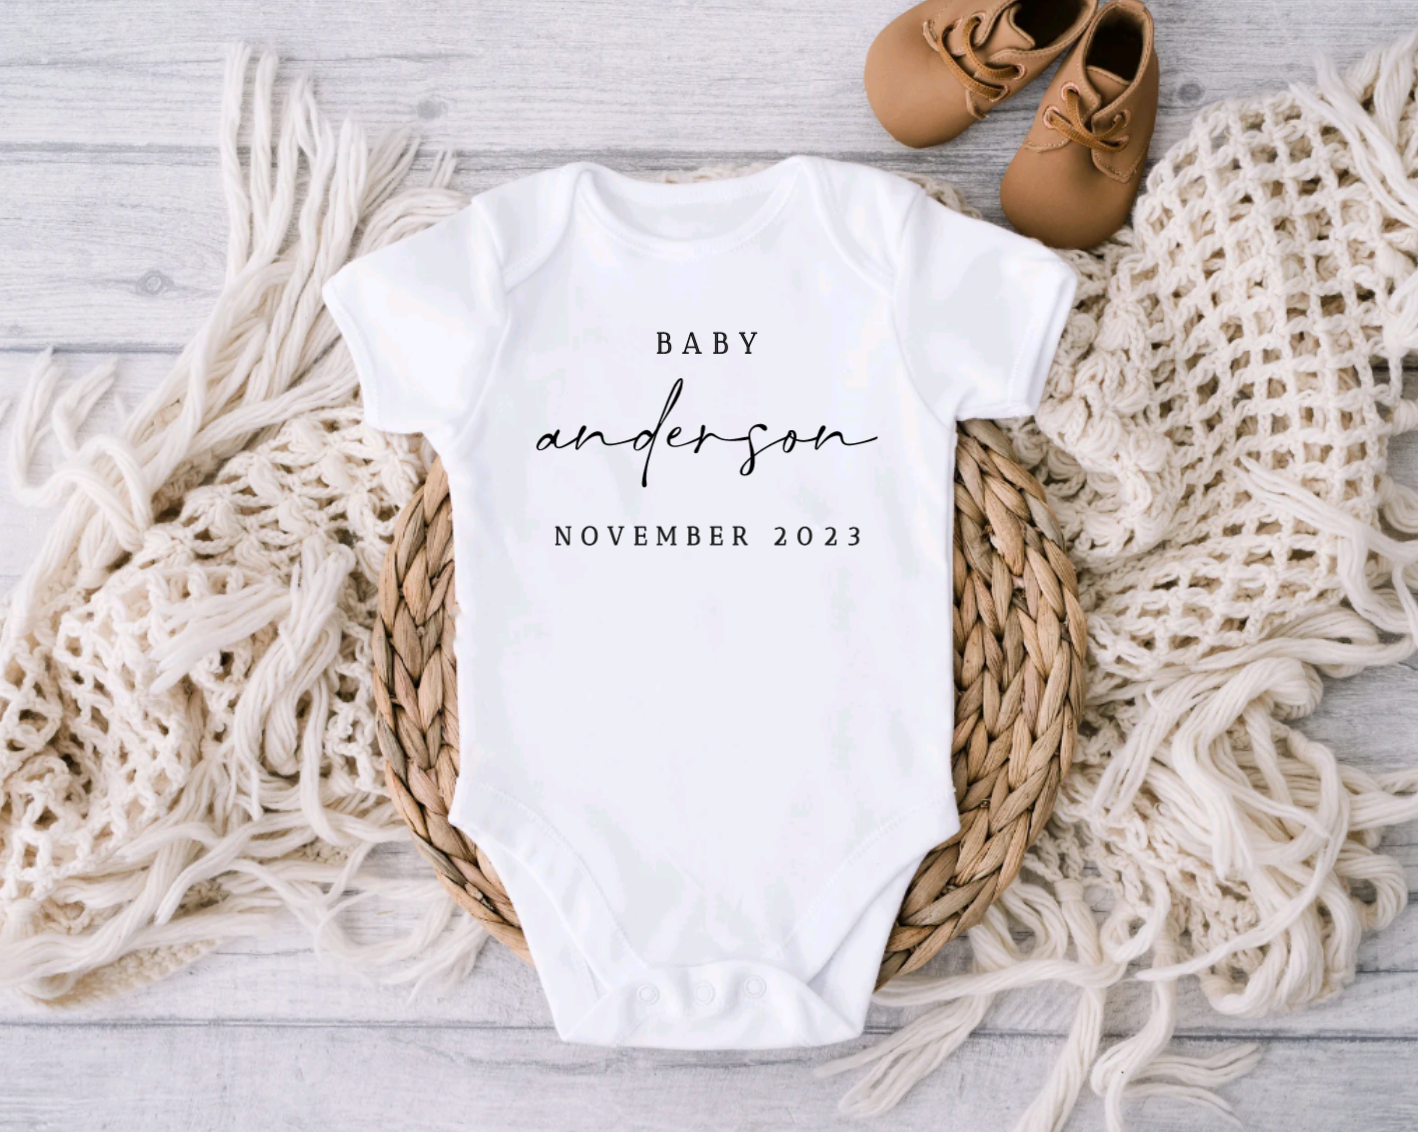 Personalized Baby Coming Soon Announcement White Bodysuit